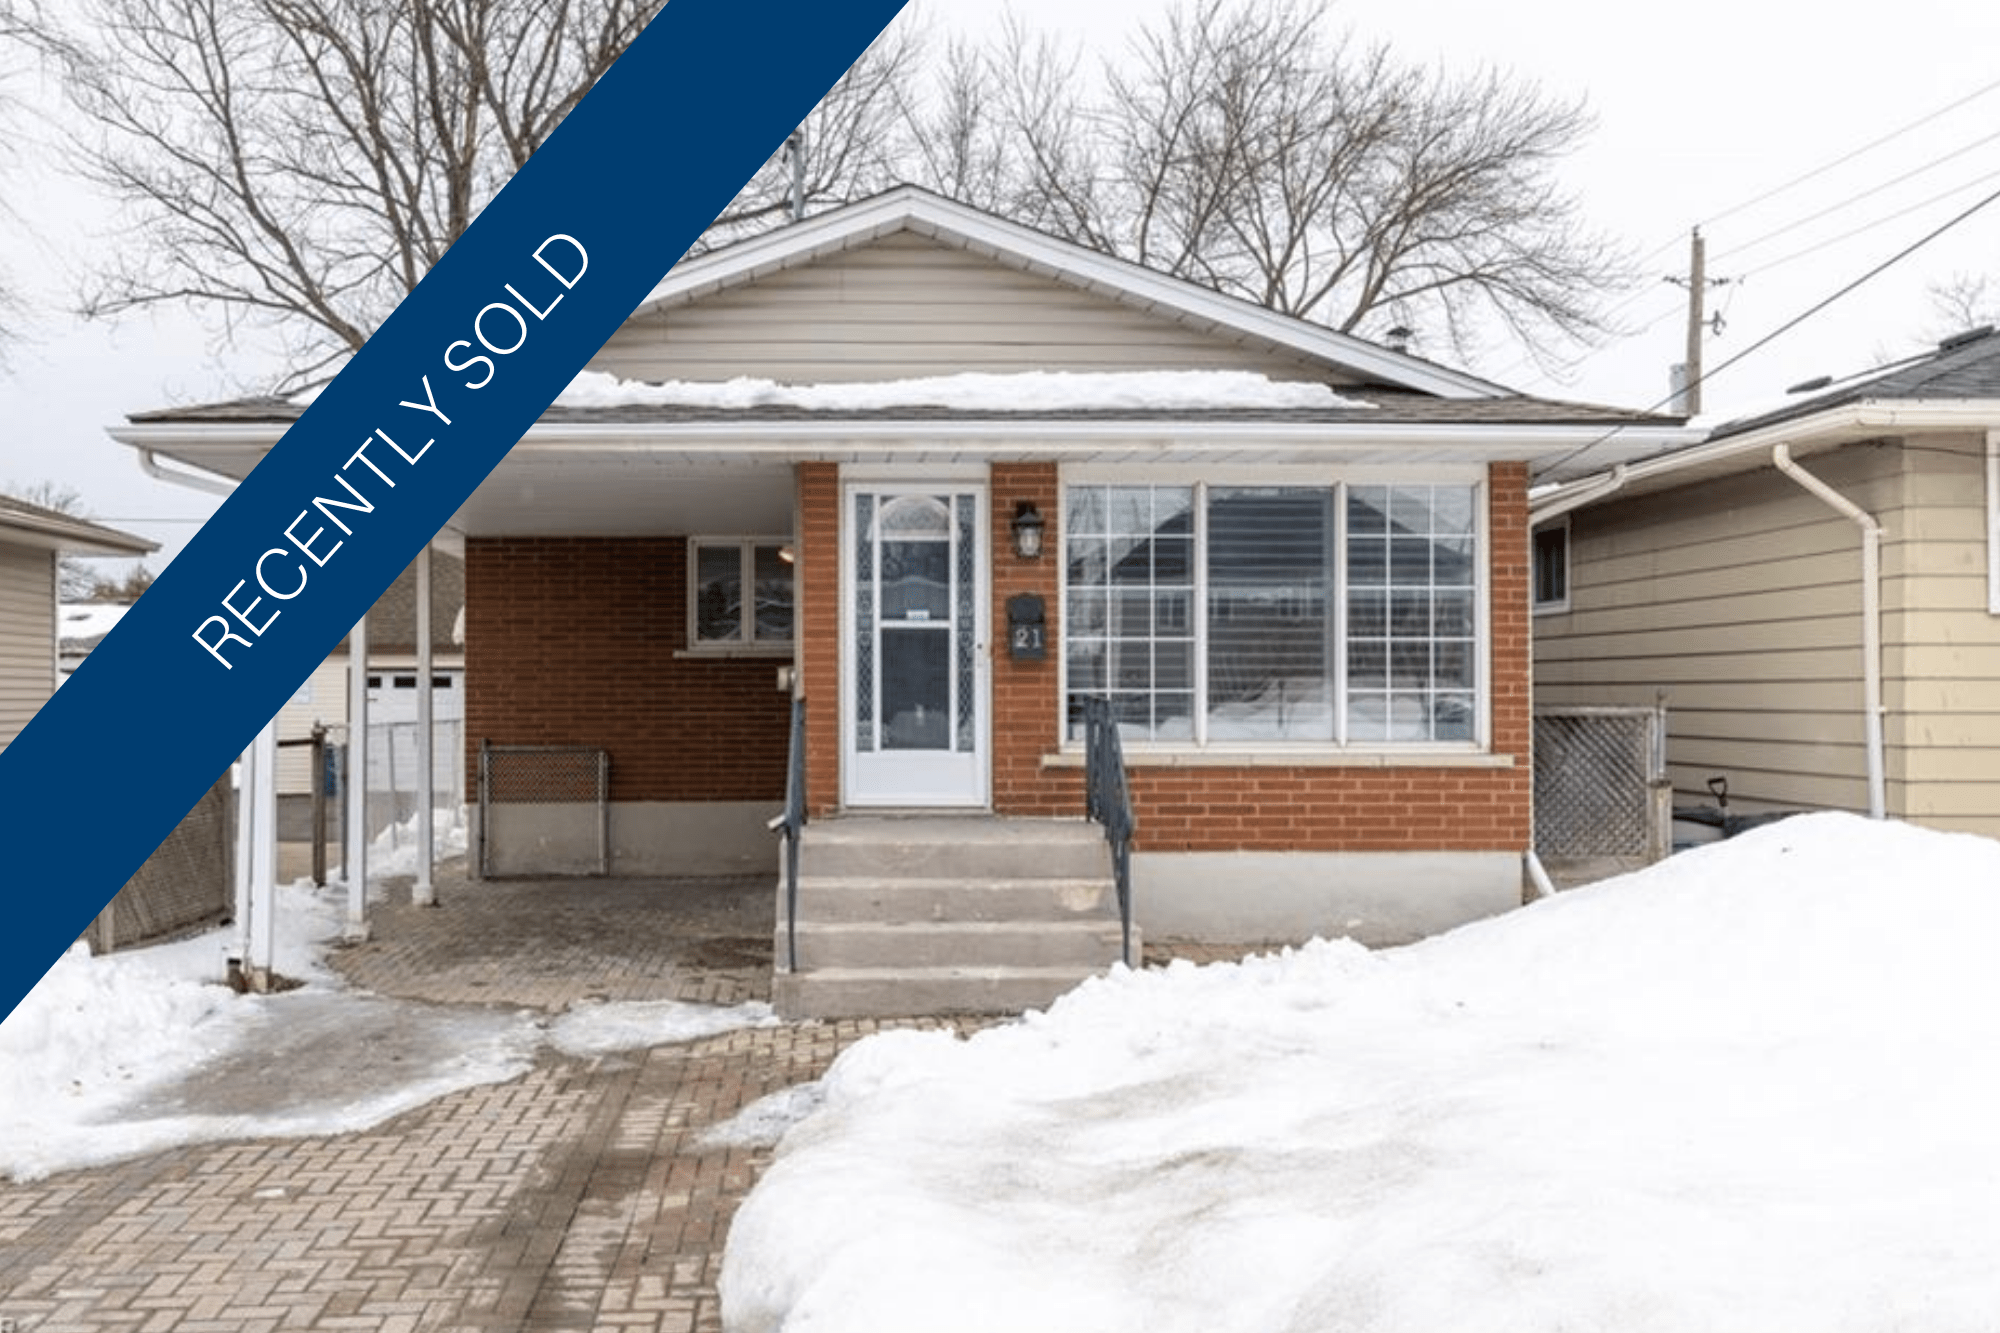 Property image for 21 Alexandra Boulevard, St. Catharines